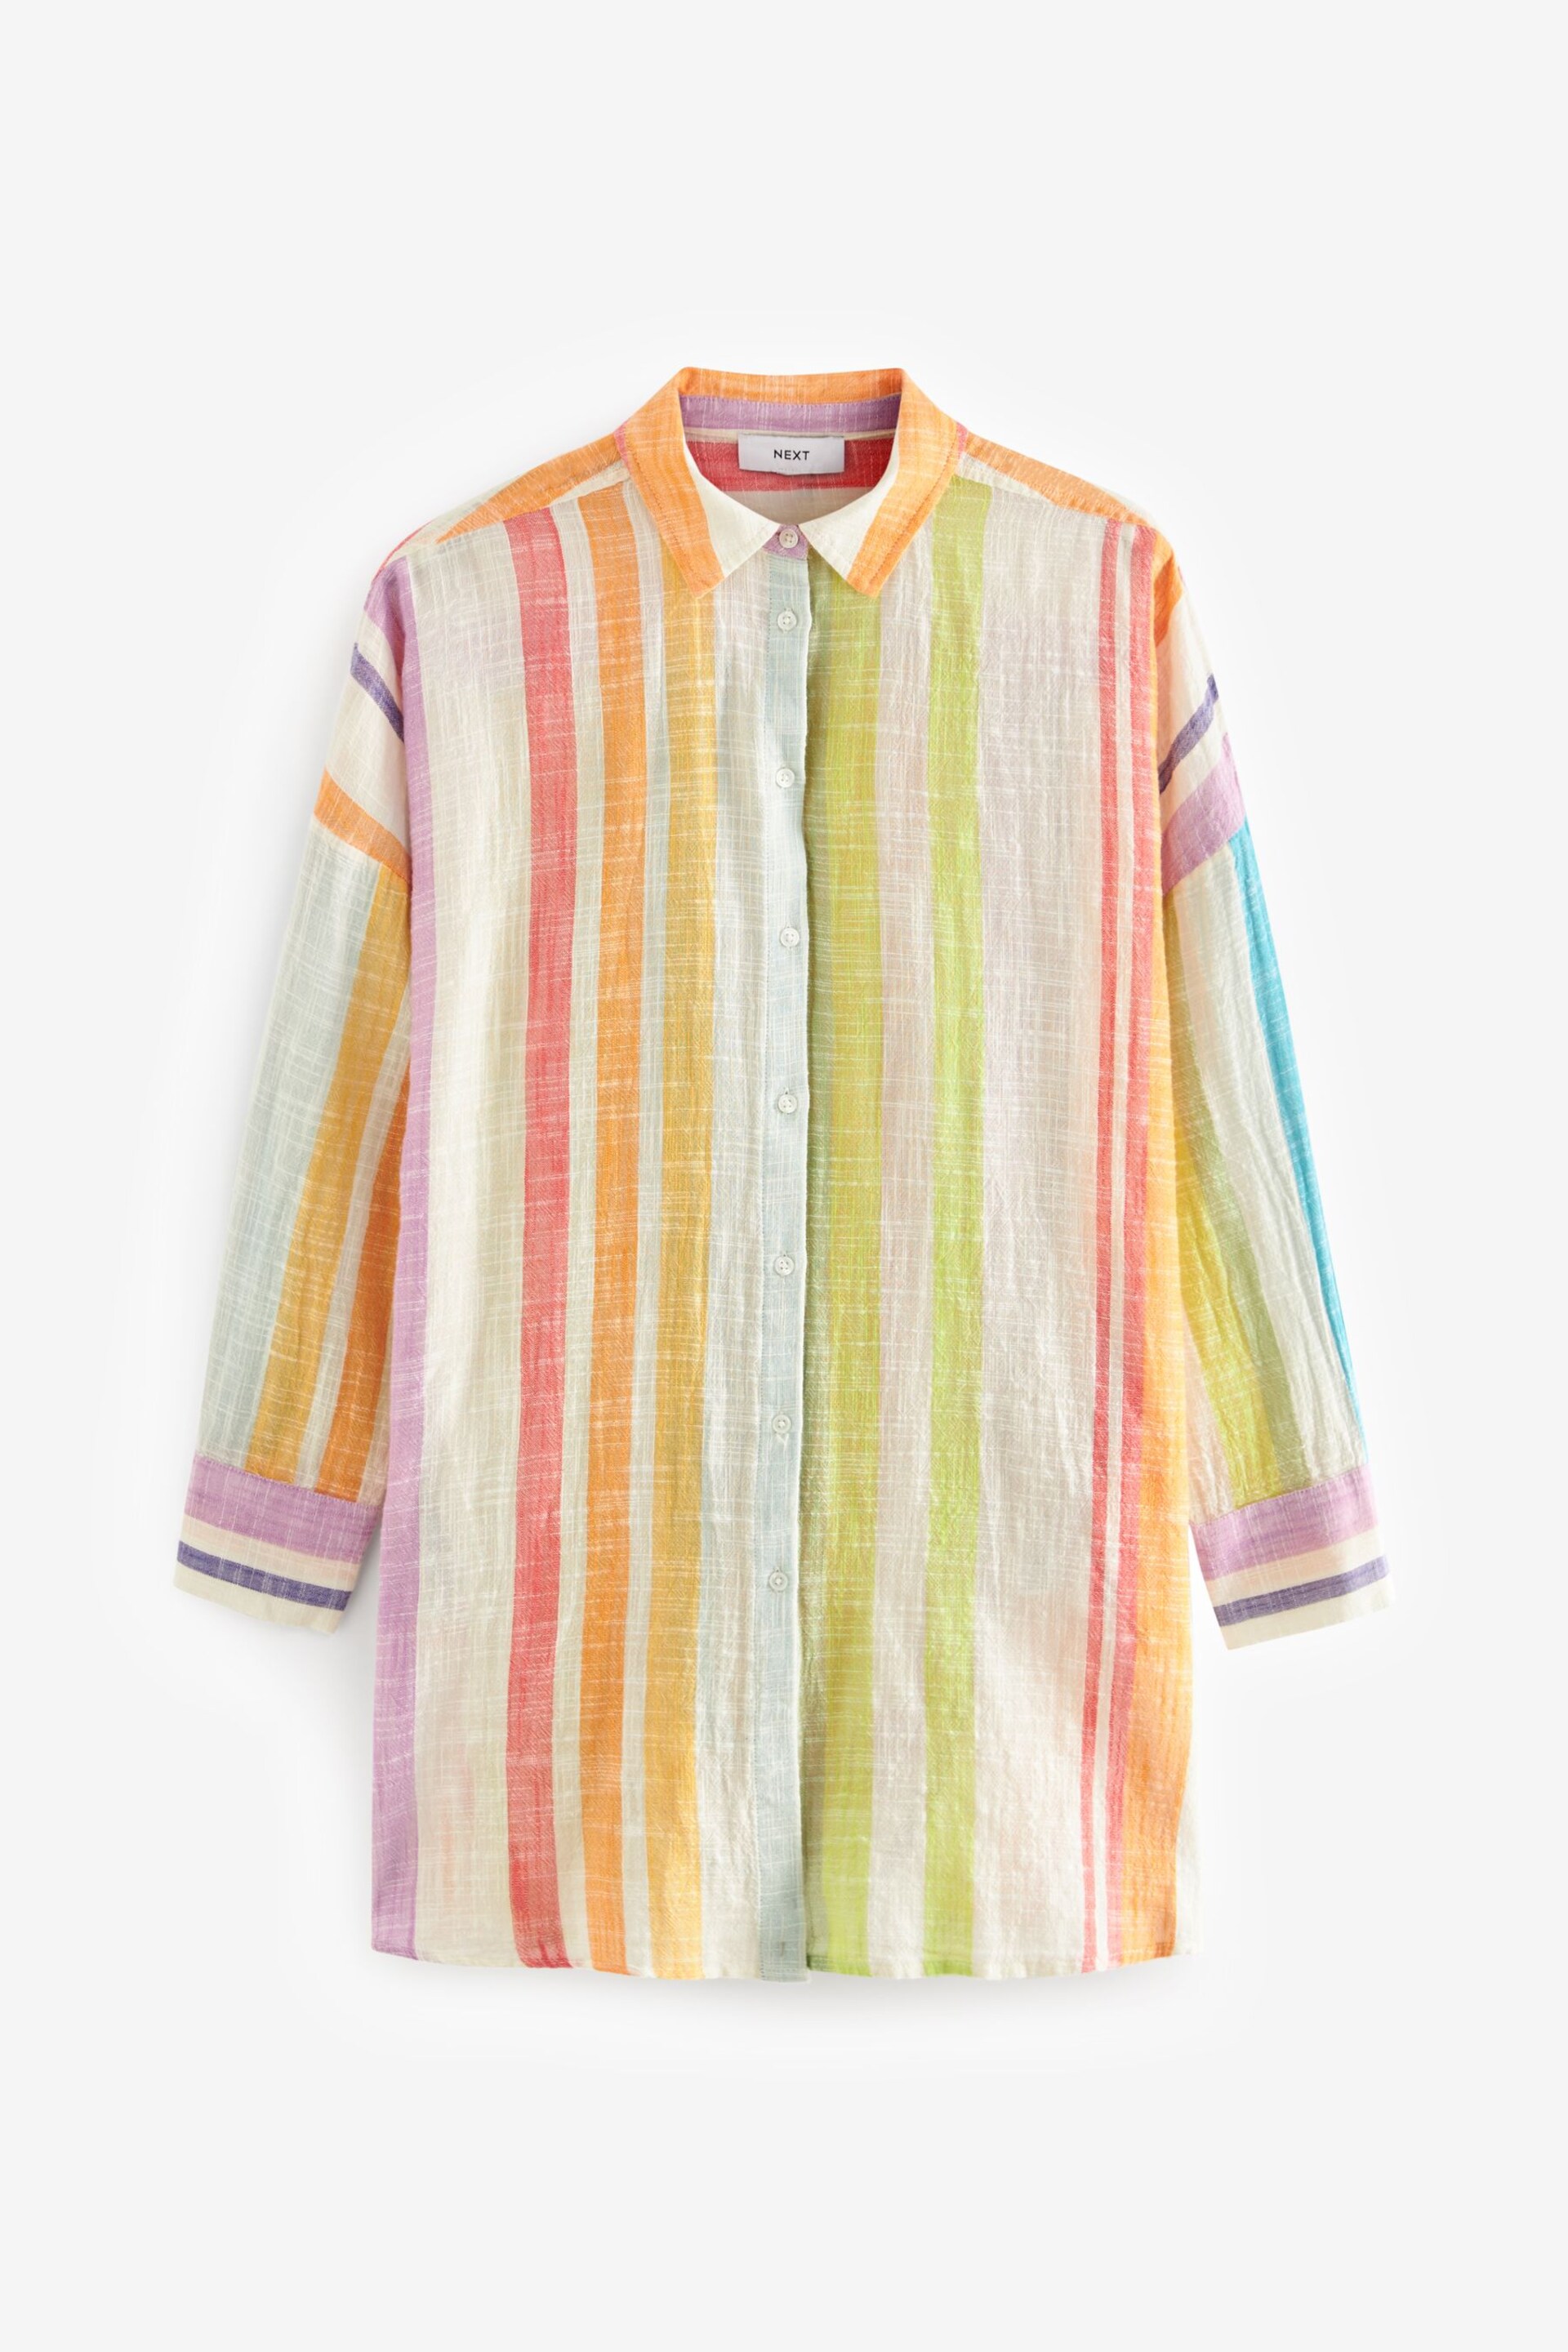 Multi Stripe Beach Shirt Cover-Up - Image 8 of 9